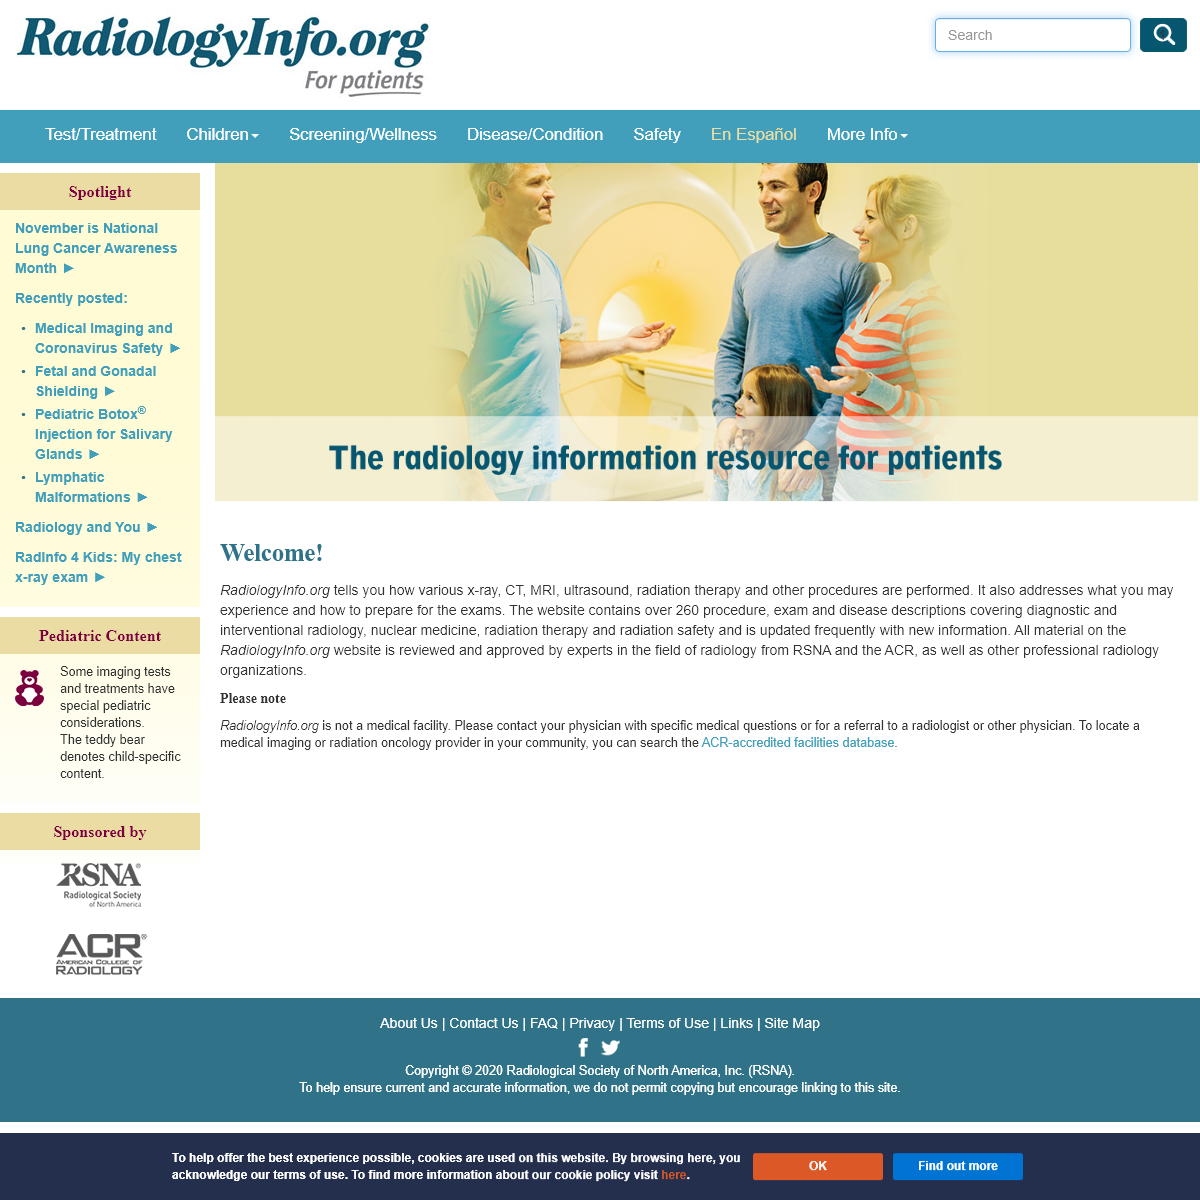 A complete backup of radiologyinfo.org